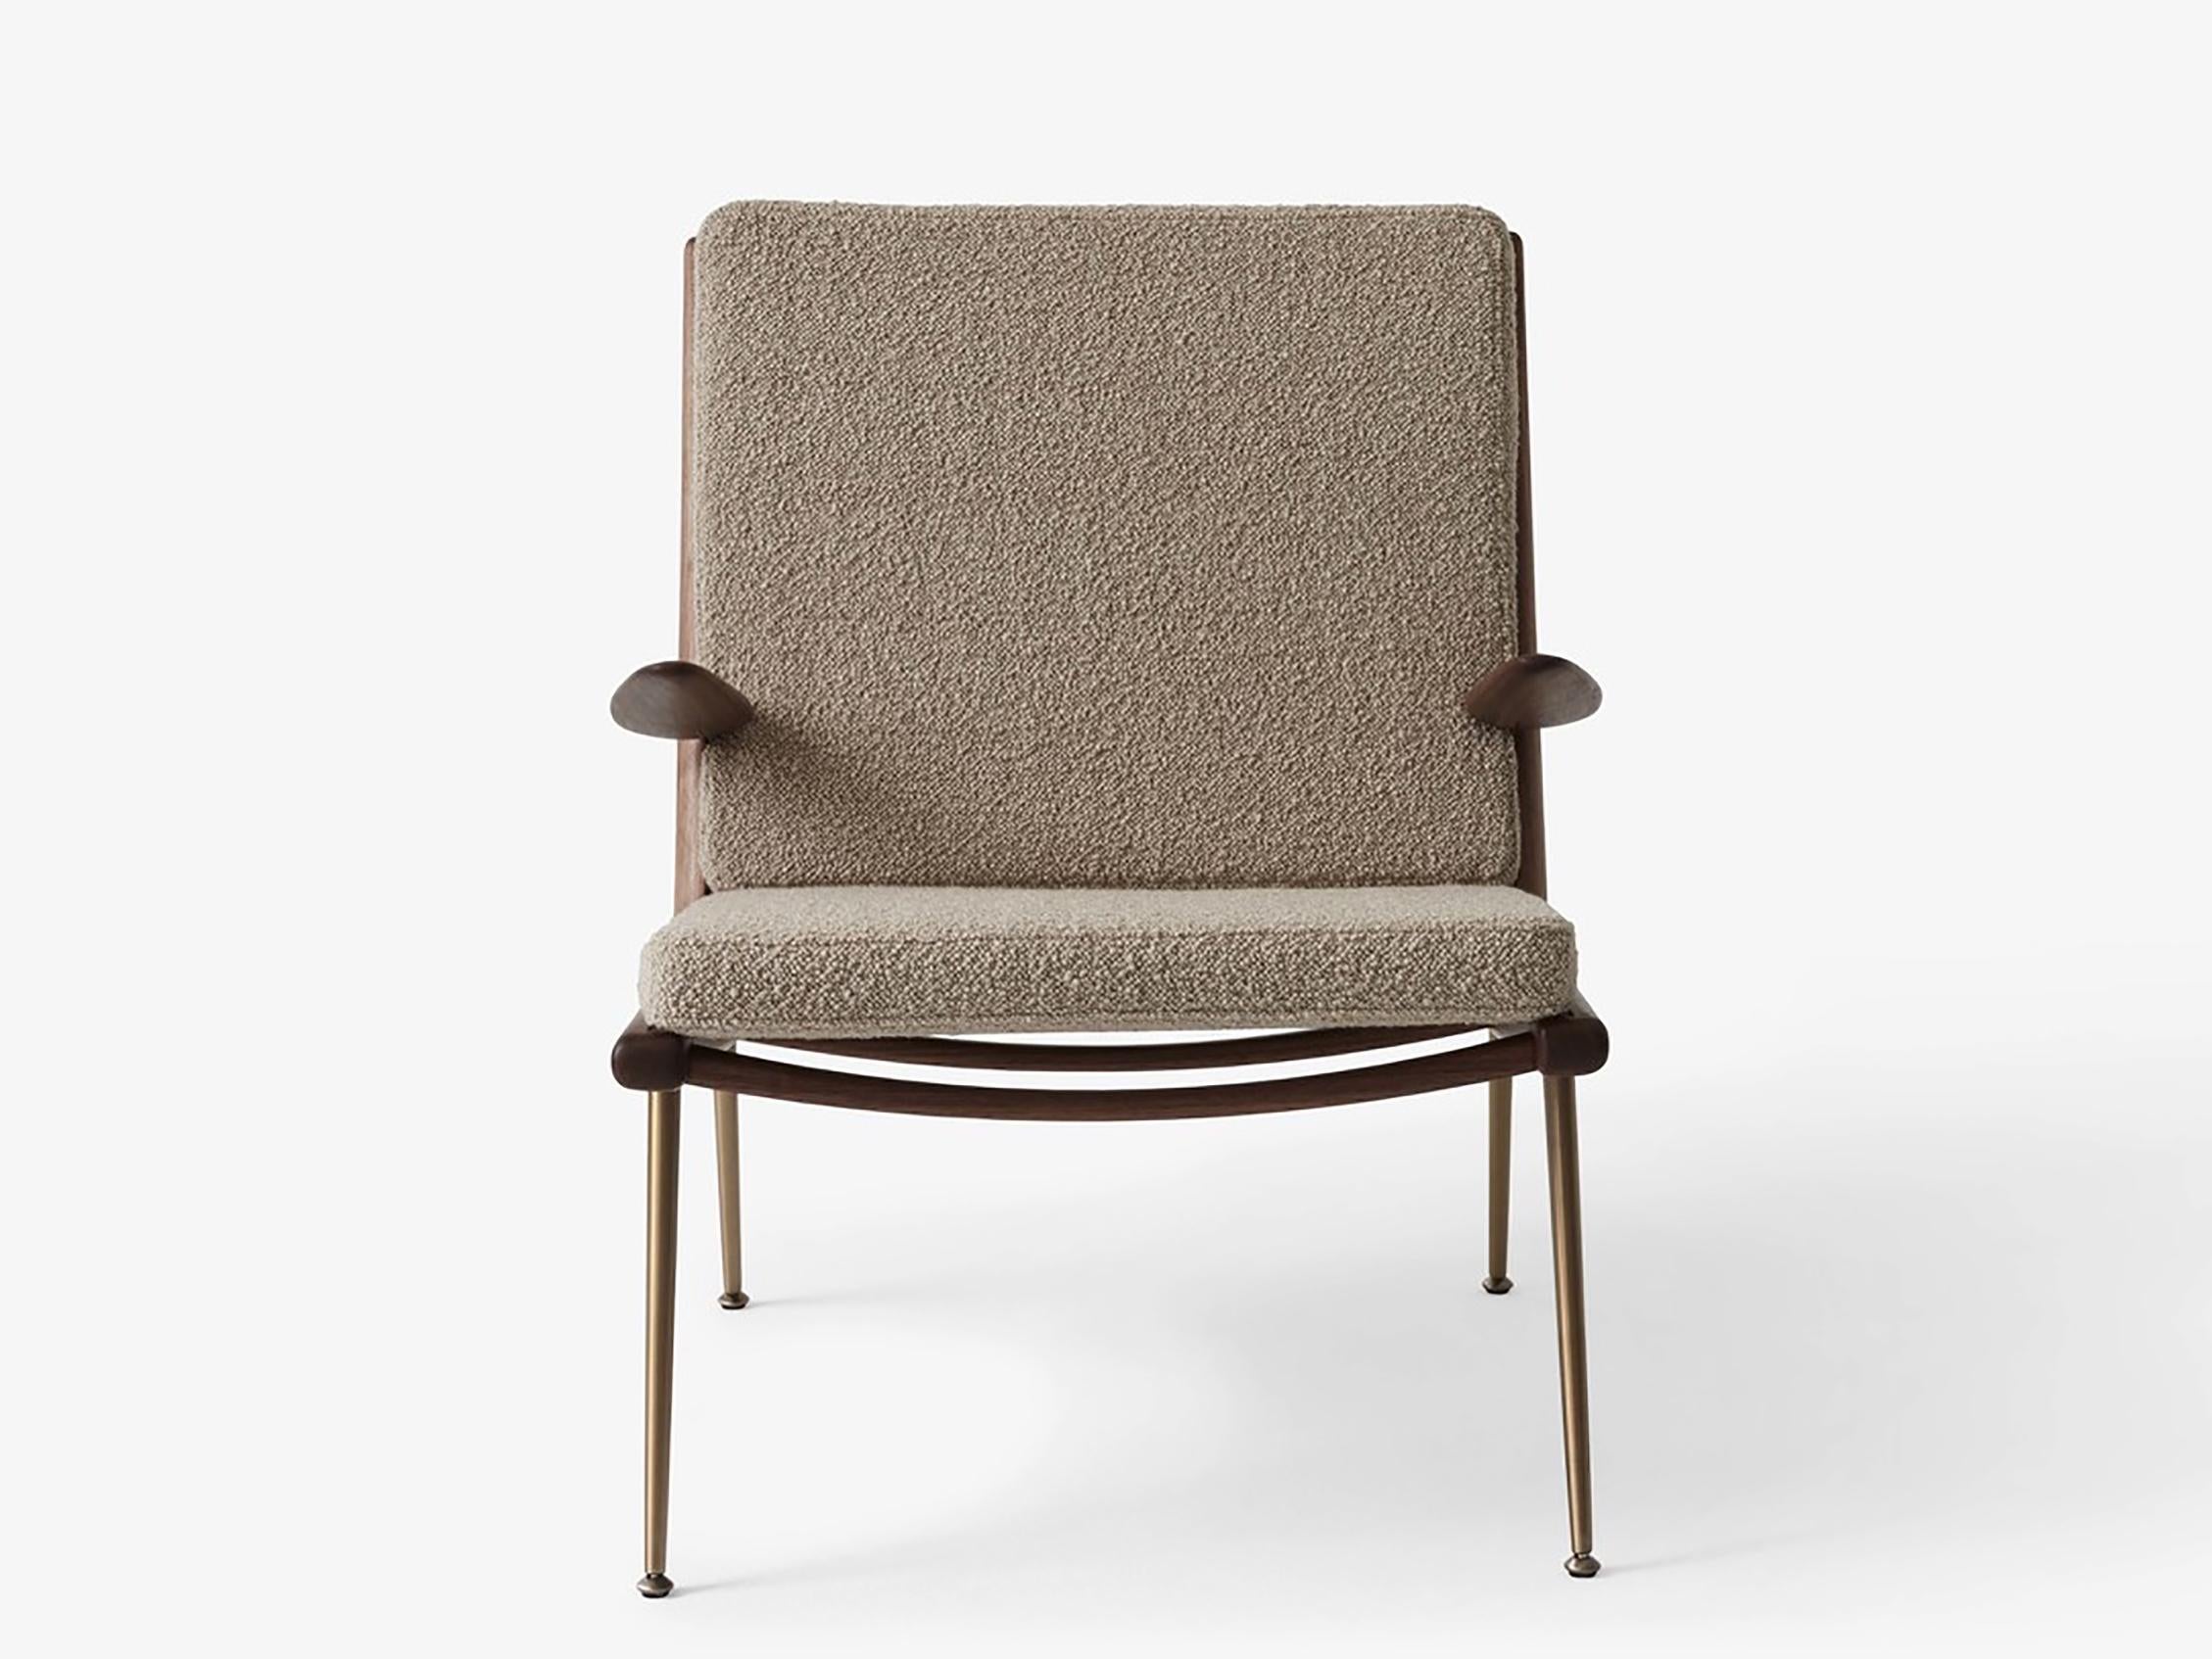 Boomerang lounge chair HM1 by Hvidt and Mølgaard. New edition. Debuted in 1956, the lounge chair by duo Hvidt & Mølgaard has a no-frills, streamlined form. From the hand-polished wooden frame, to its slender brass legs, the Boomerang endures as a